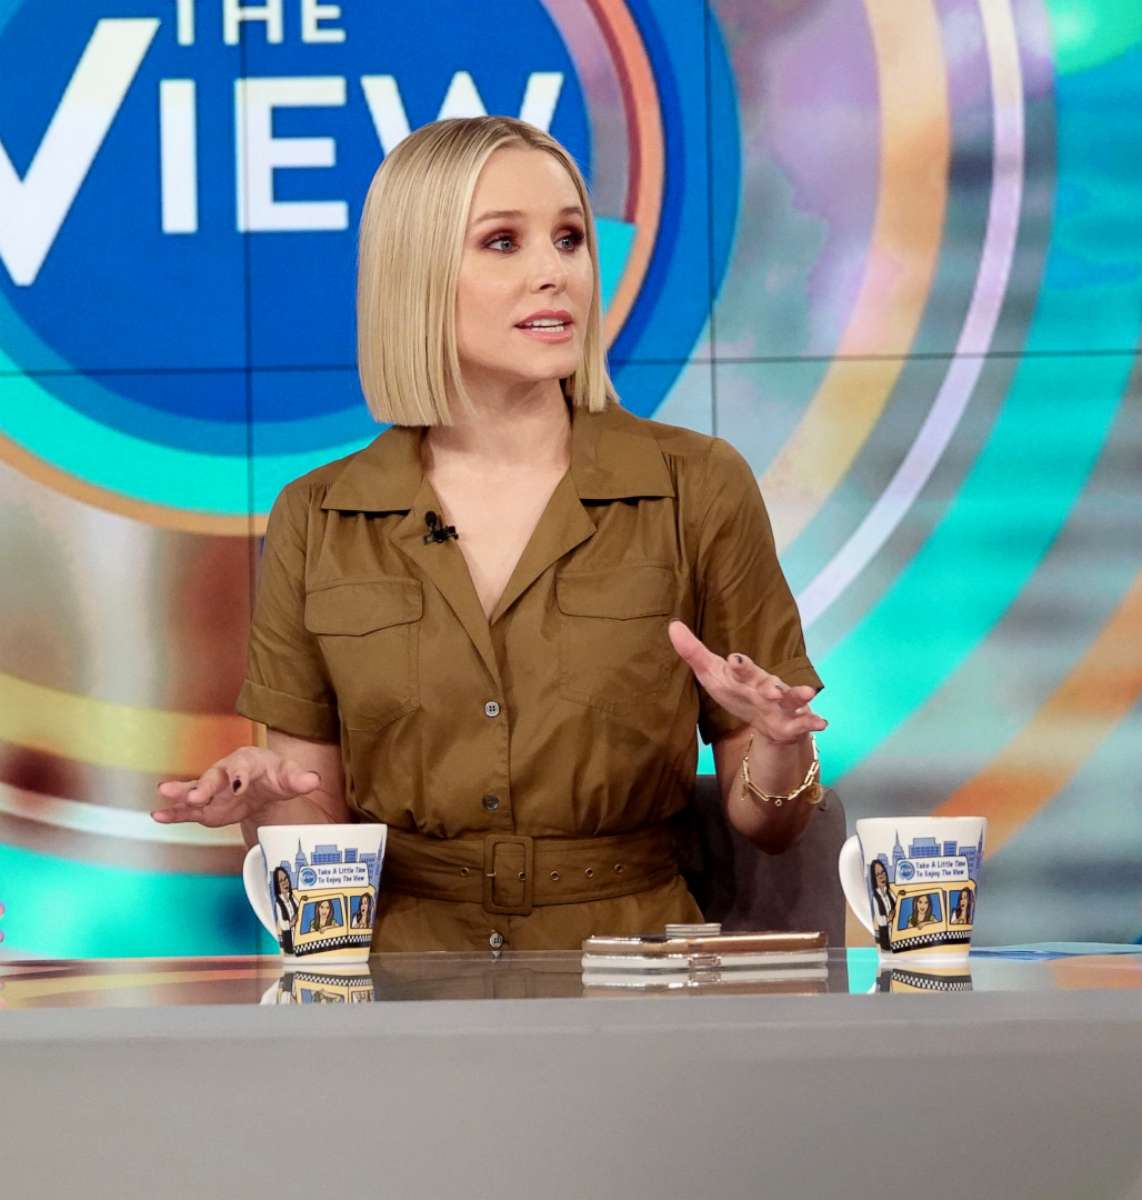 PHOTO: Kristen Bell joins "The View" to discuss the new "Frozen 2" movie, Nov. 12, 2019.